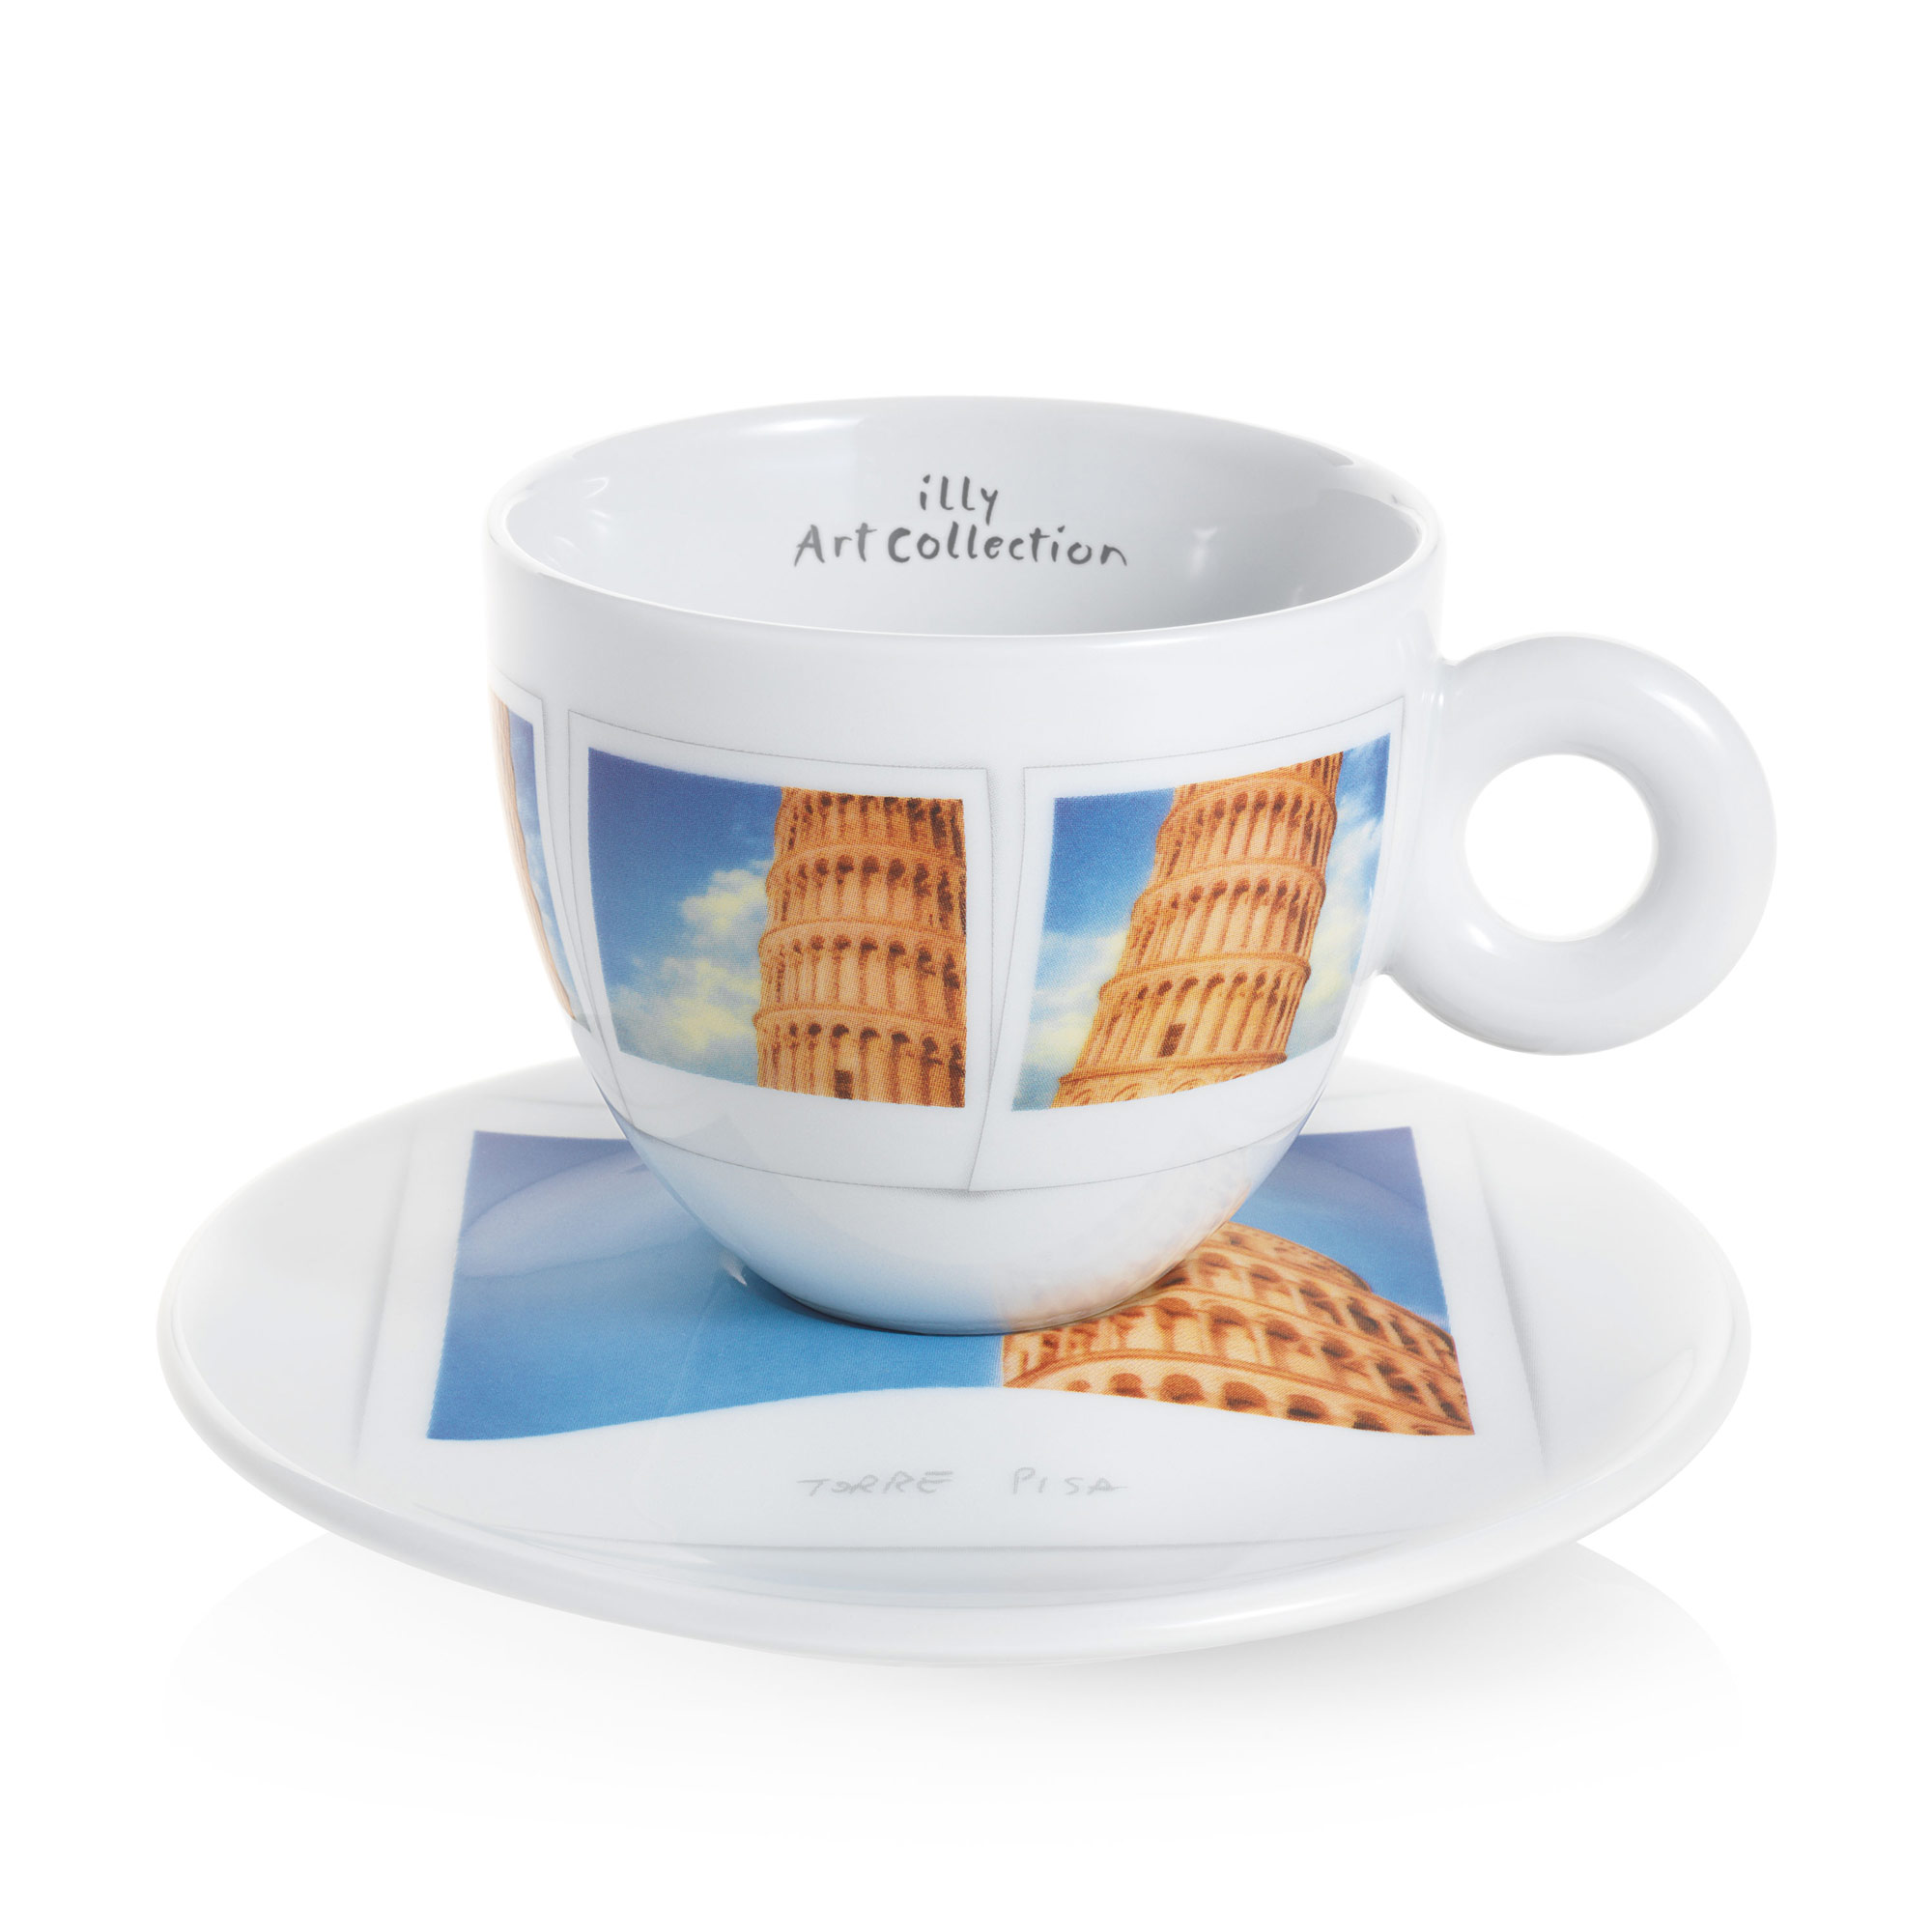 Maurizio Galimberti illy Art Collection Cappuccino Cup